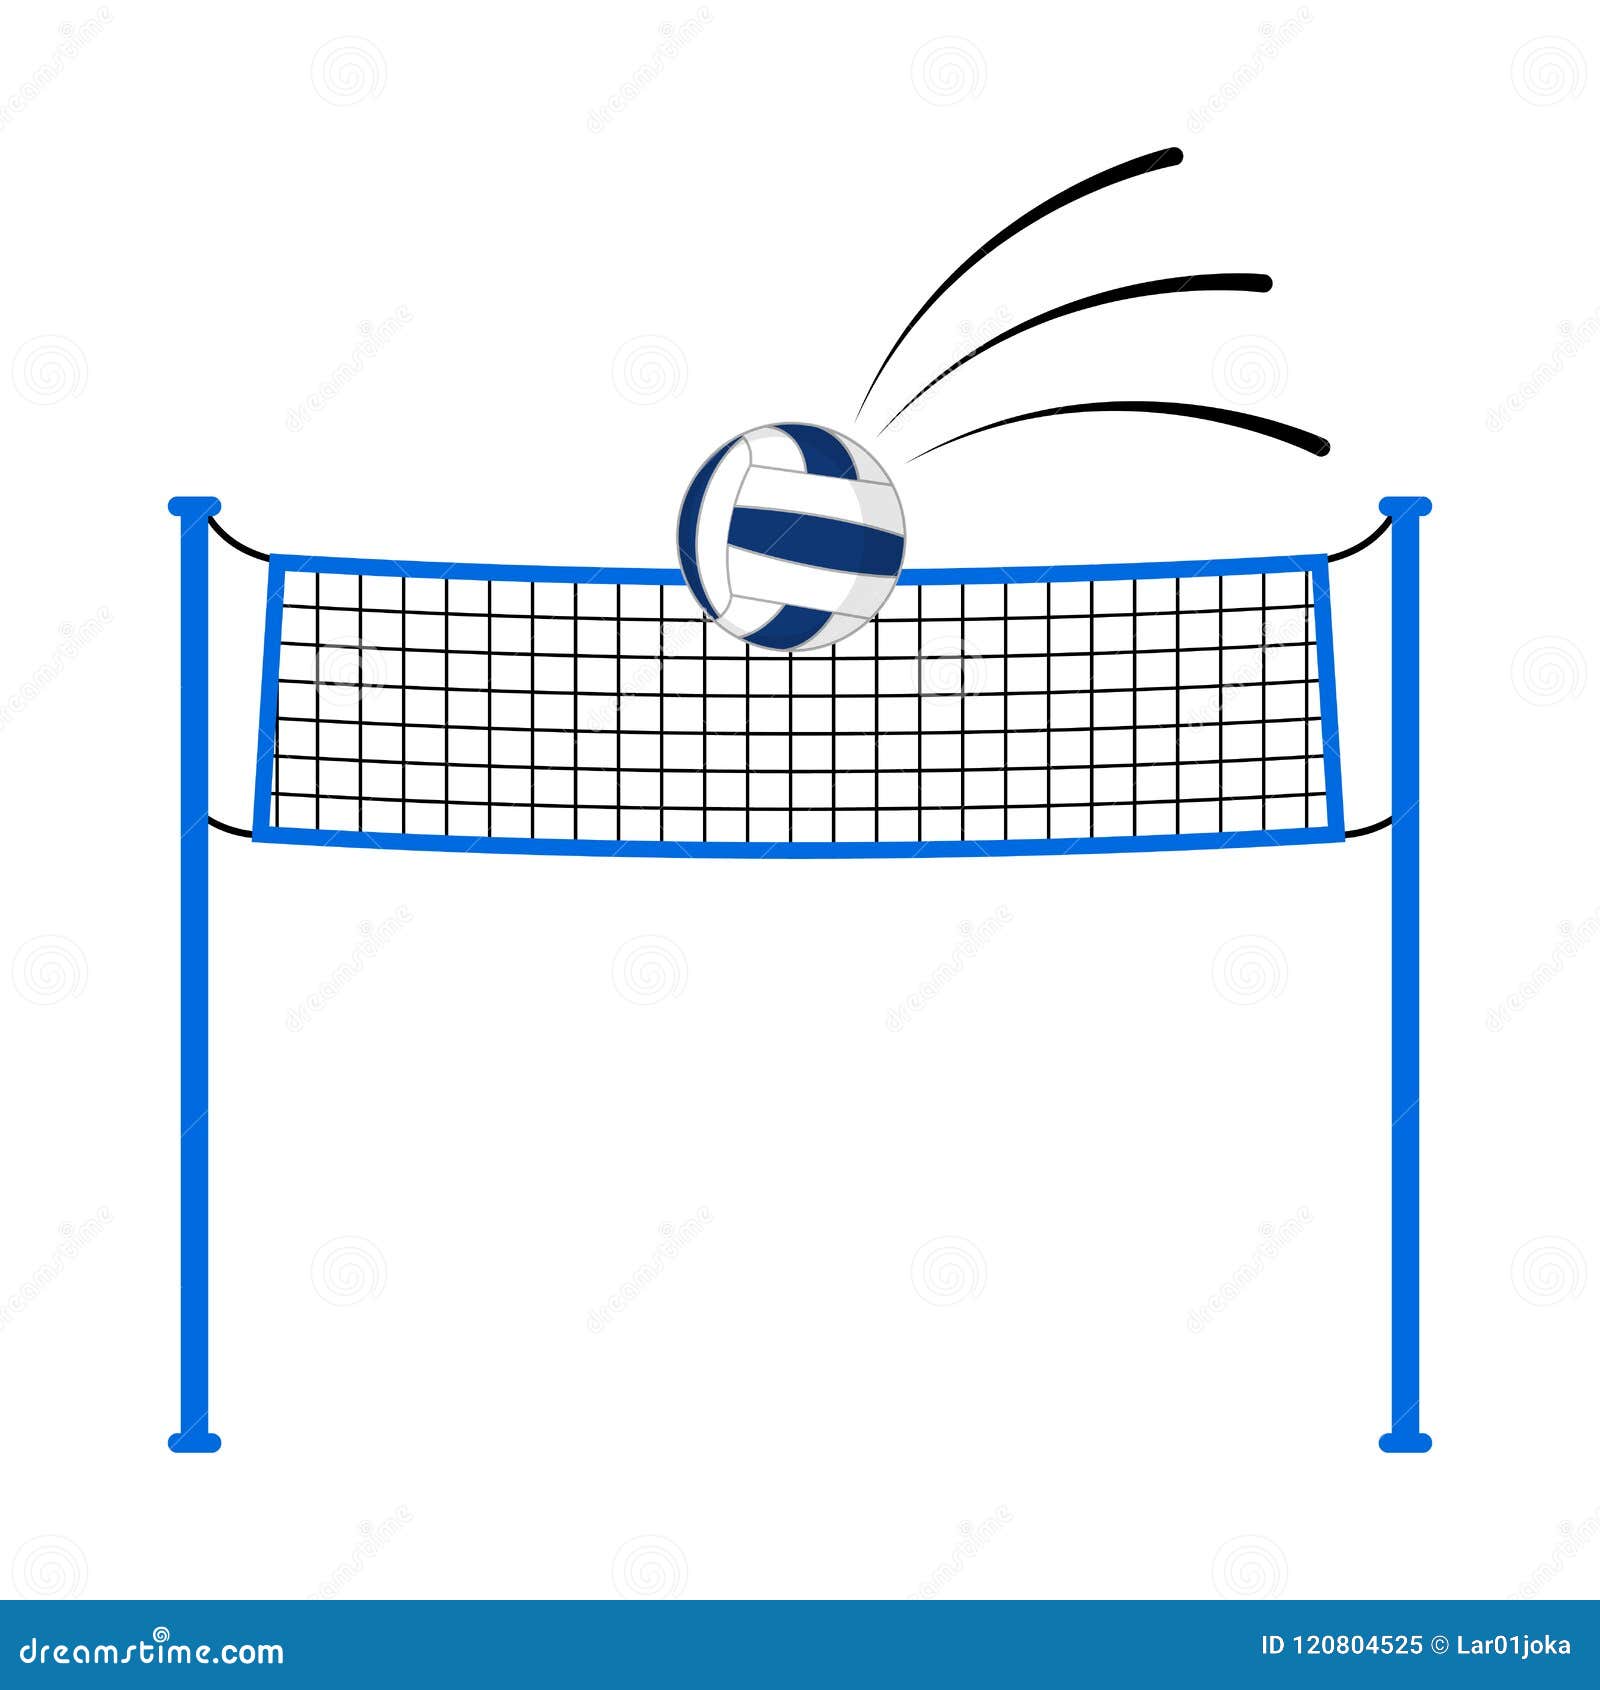 Volleyball ball on a net stock vector. Illustration of play - 120804525